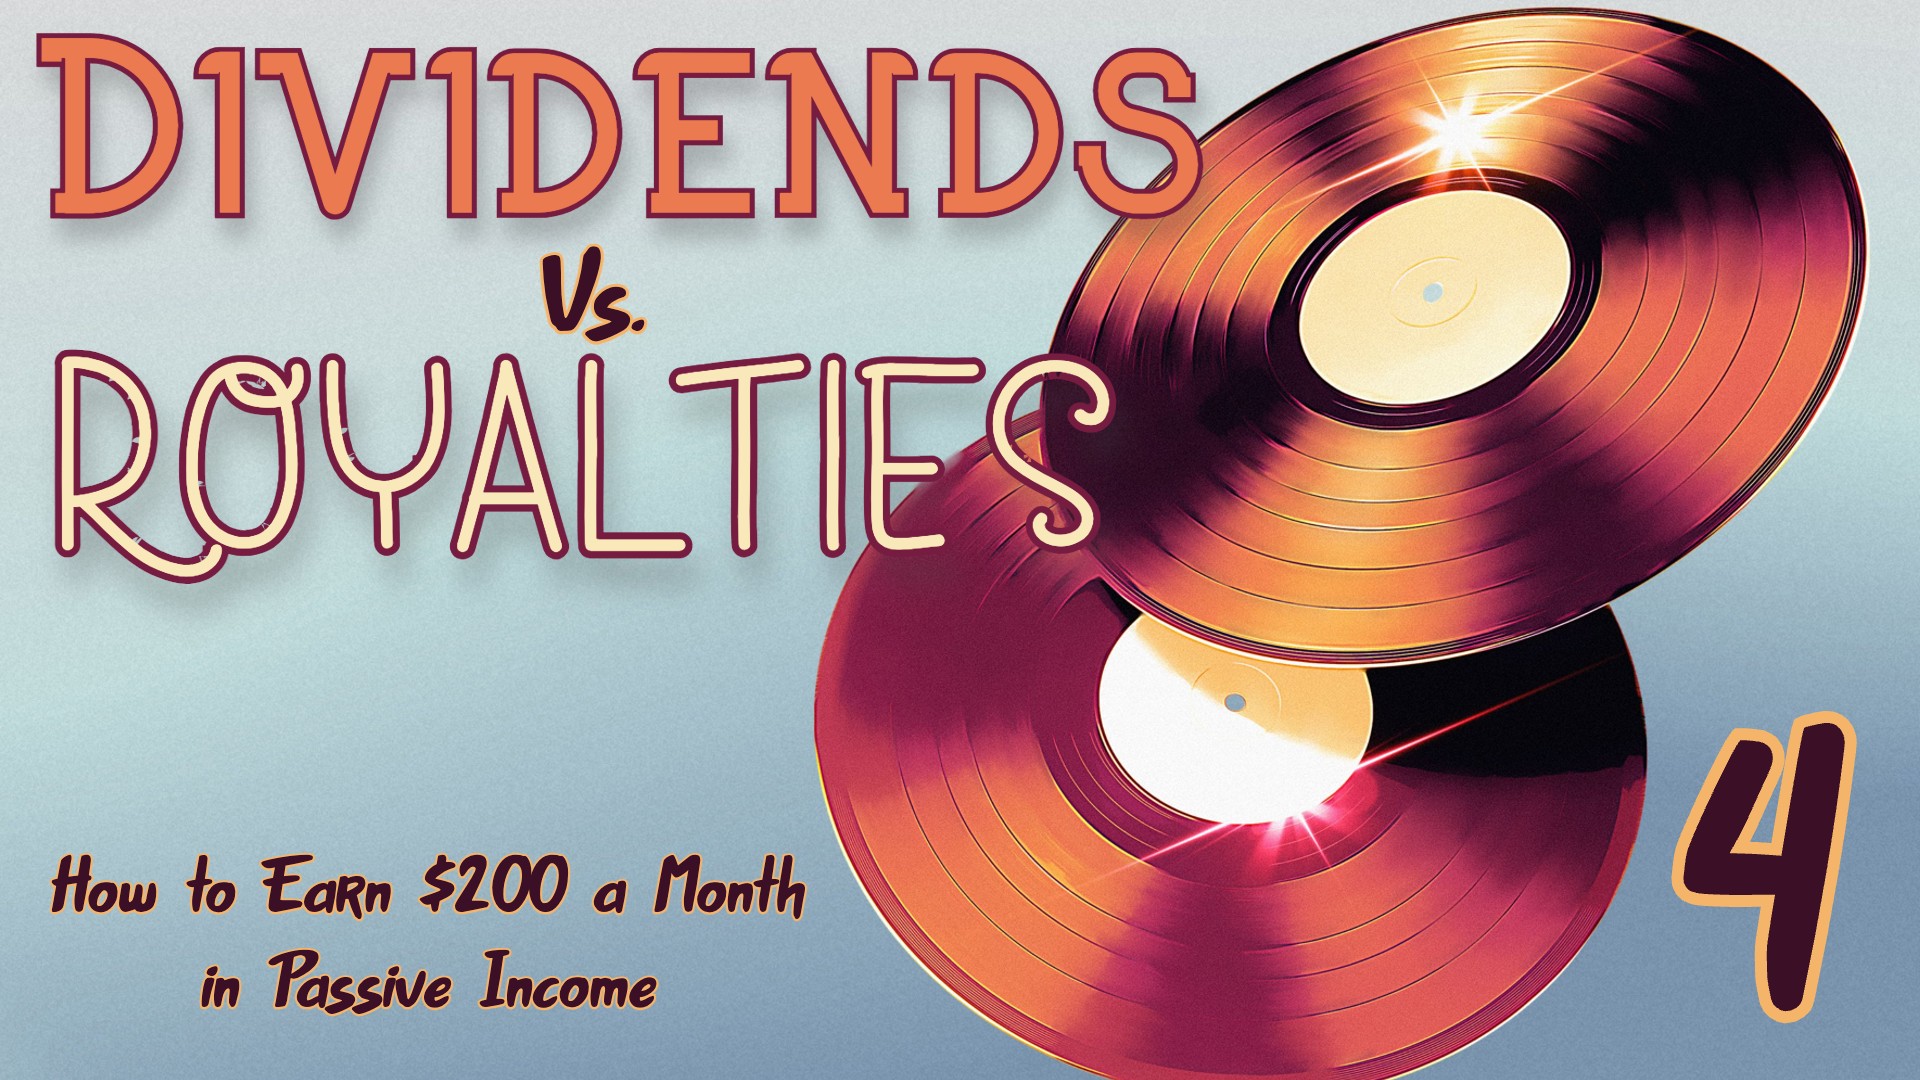 Dividends vs. Royalties part IV: How to Earn $200 a Month in Passive Income